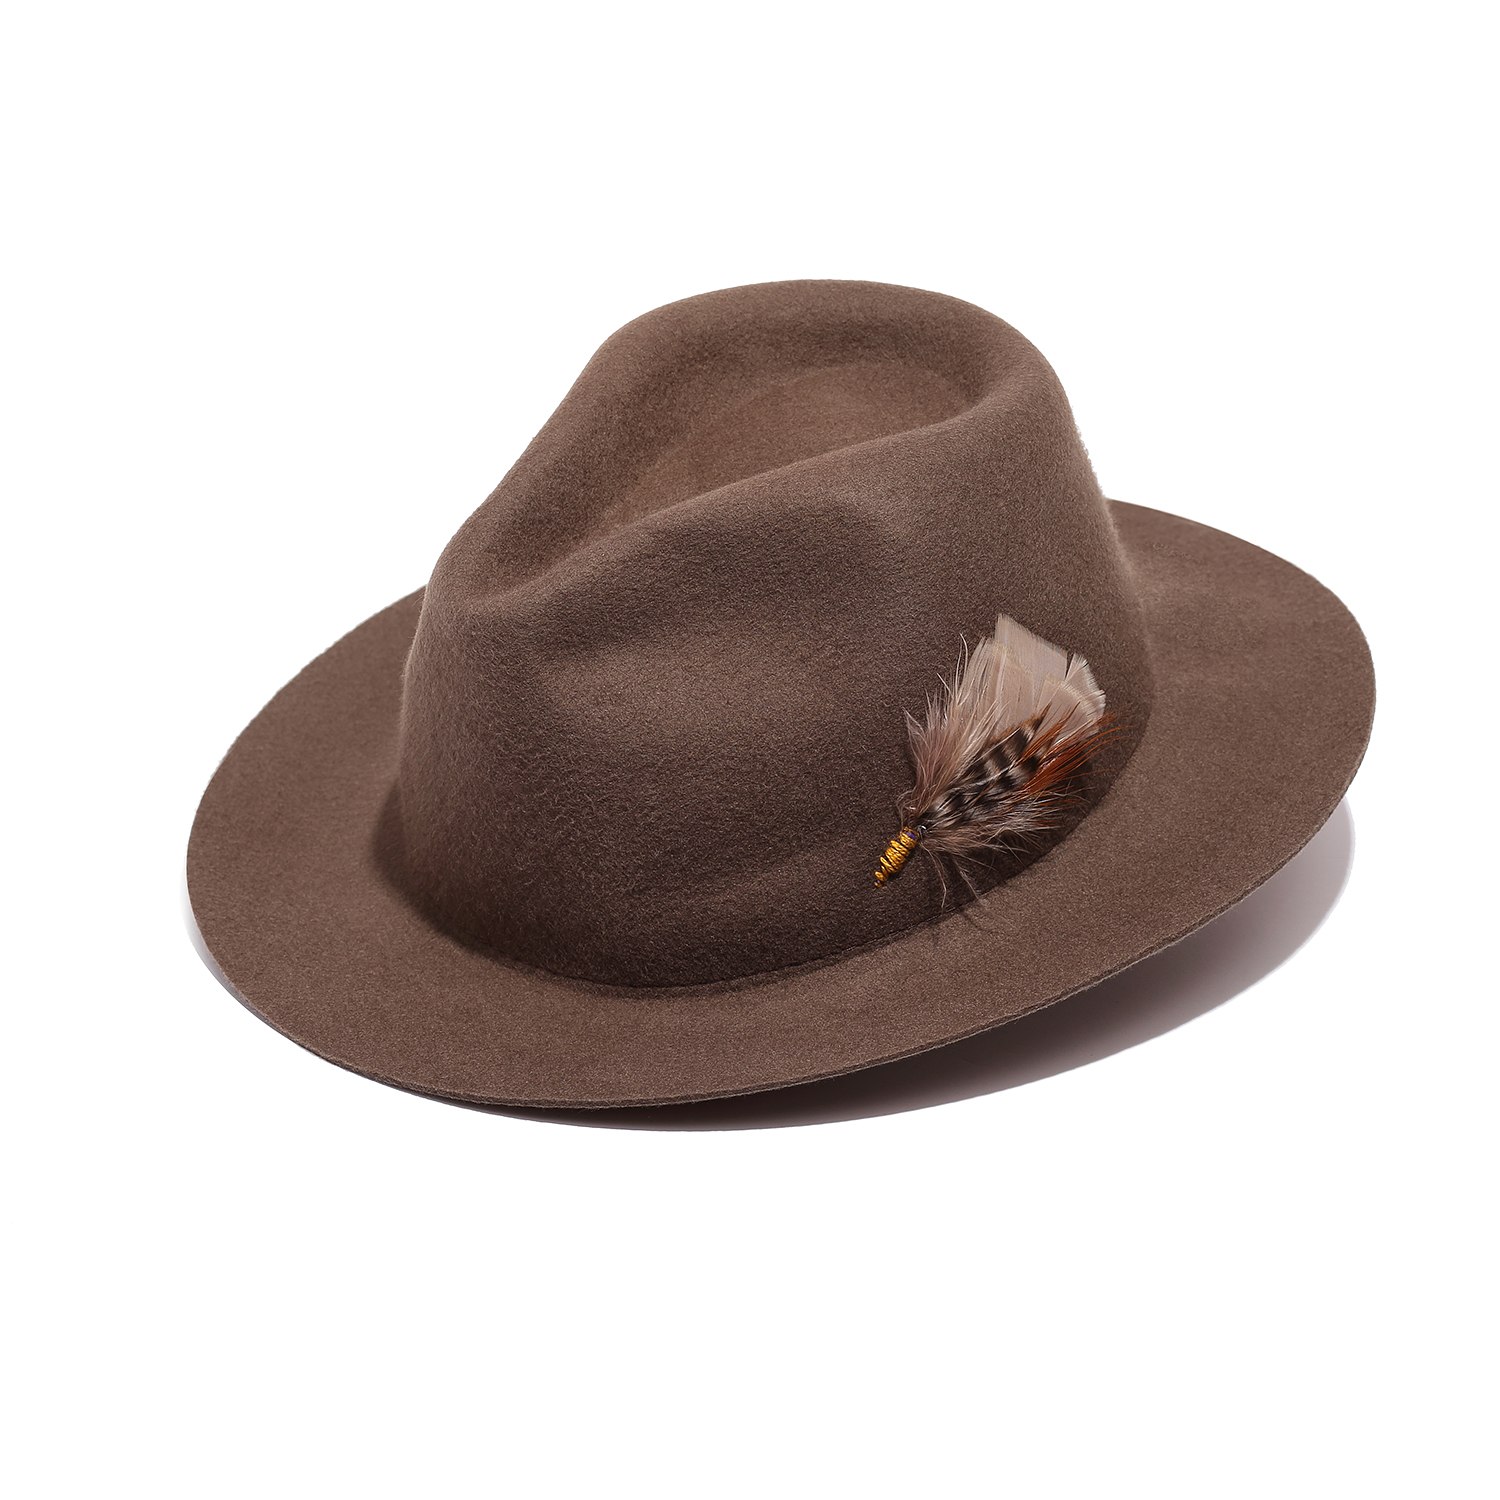 Justine Hats Men's Brown Fedora Hat With Exquisite Feather And Hand Embroidery